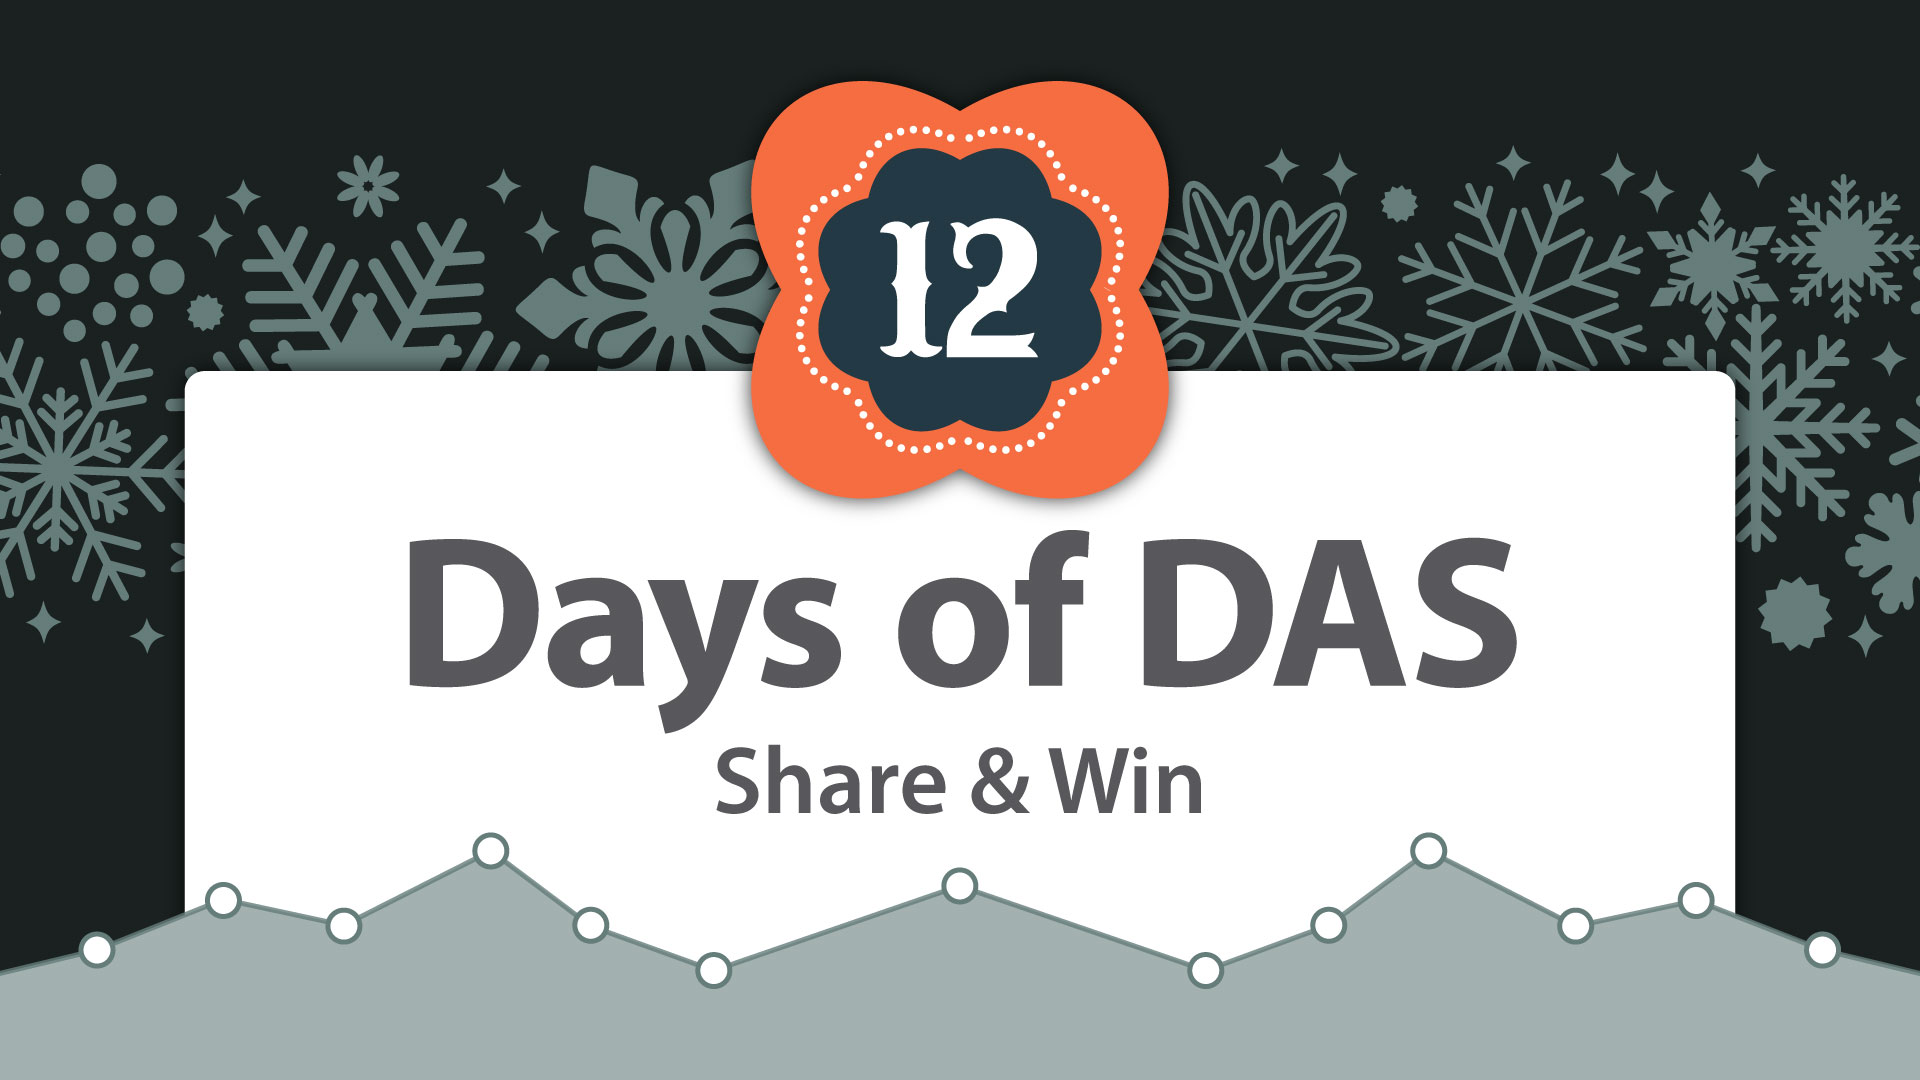 Featured image for “12 Days of DAS”